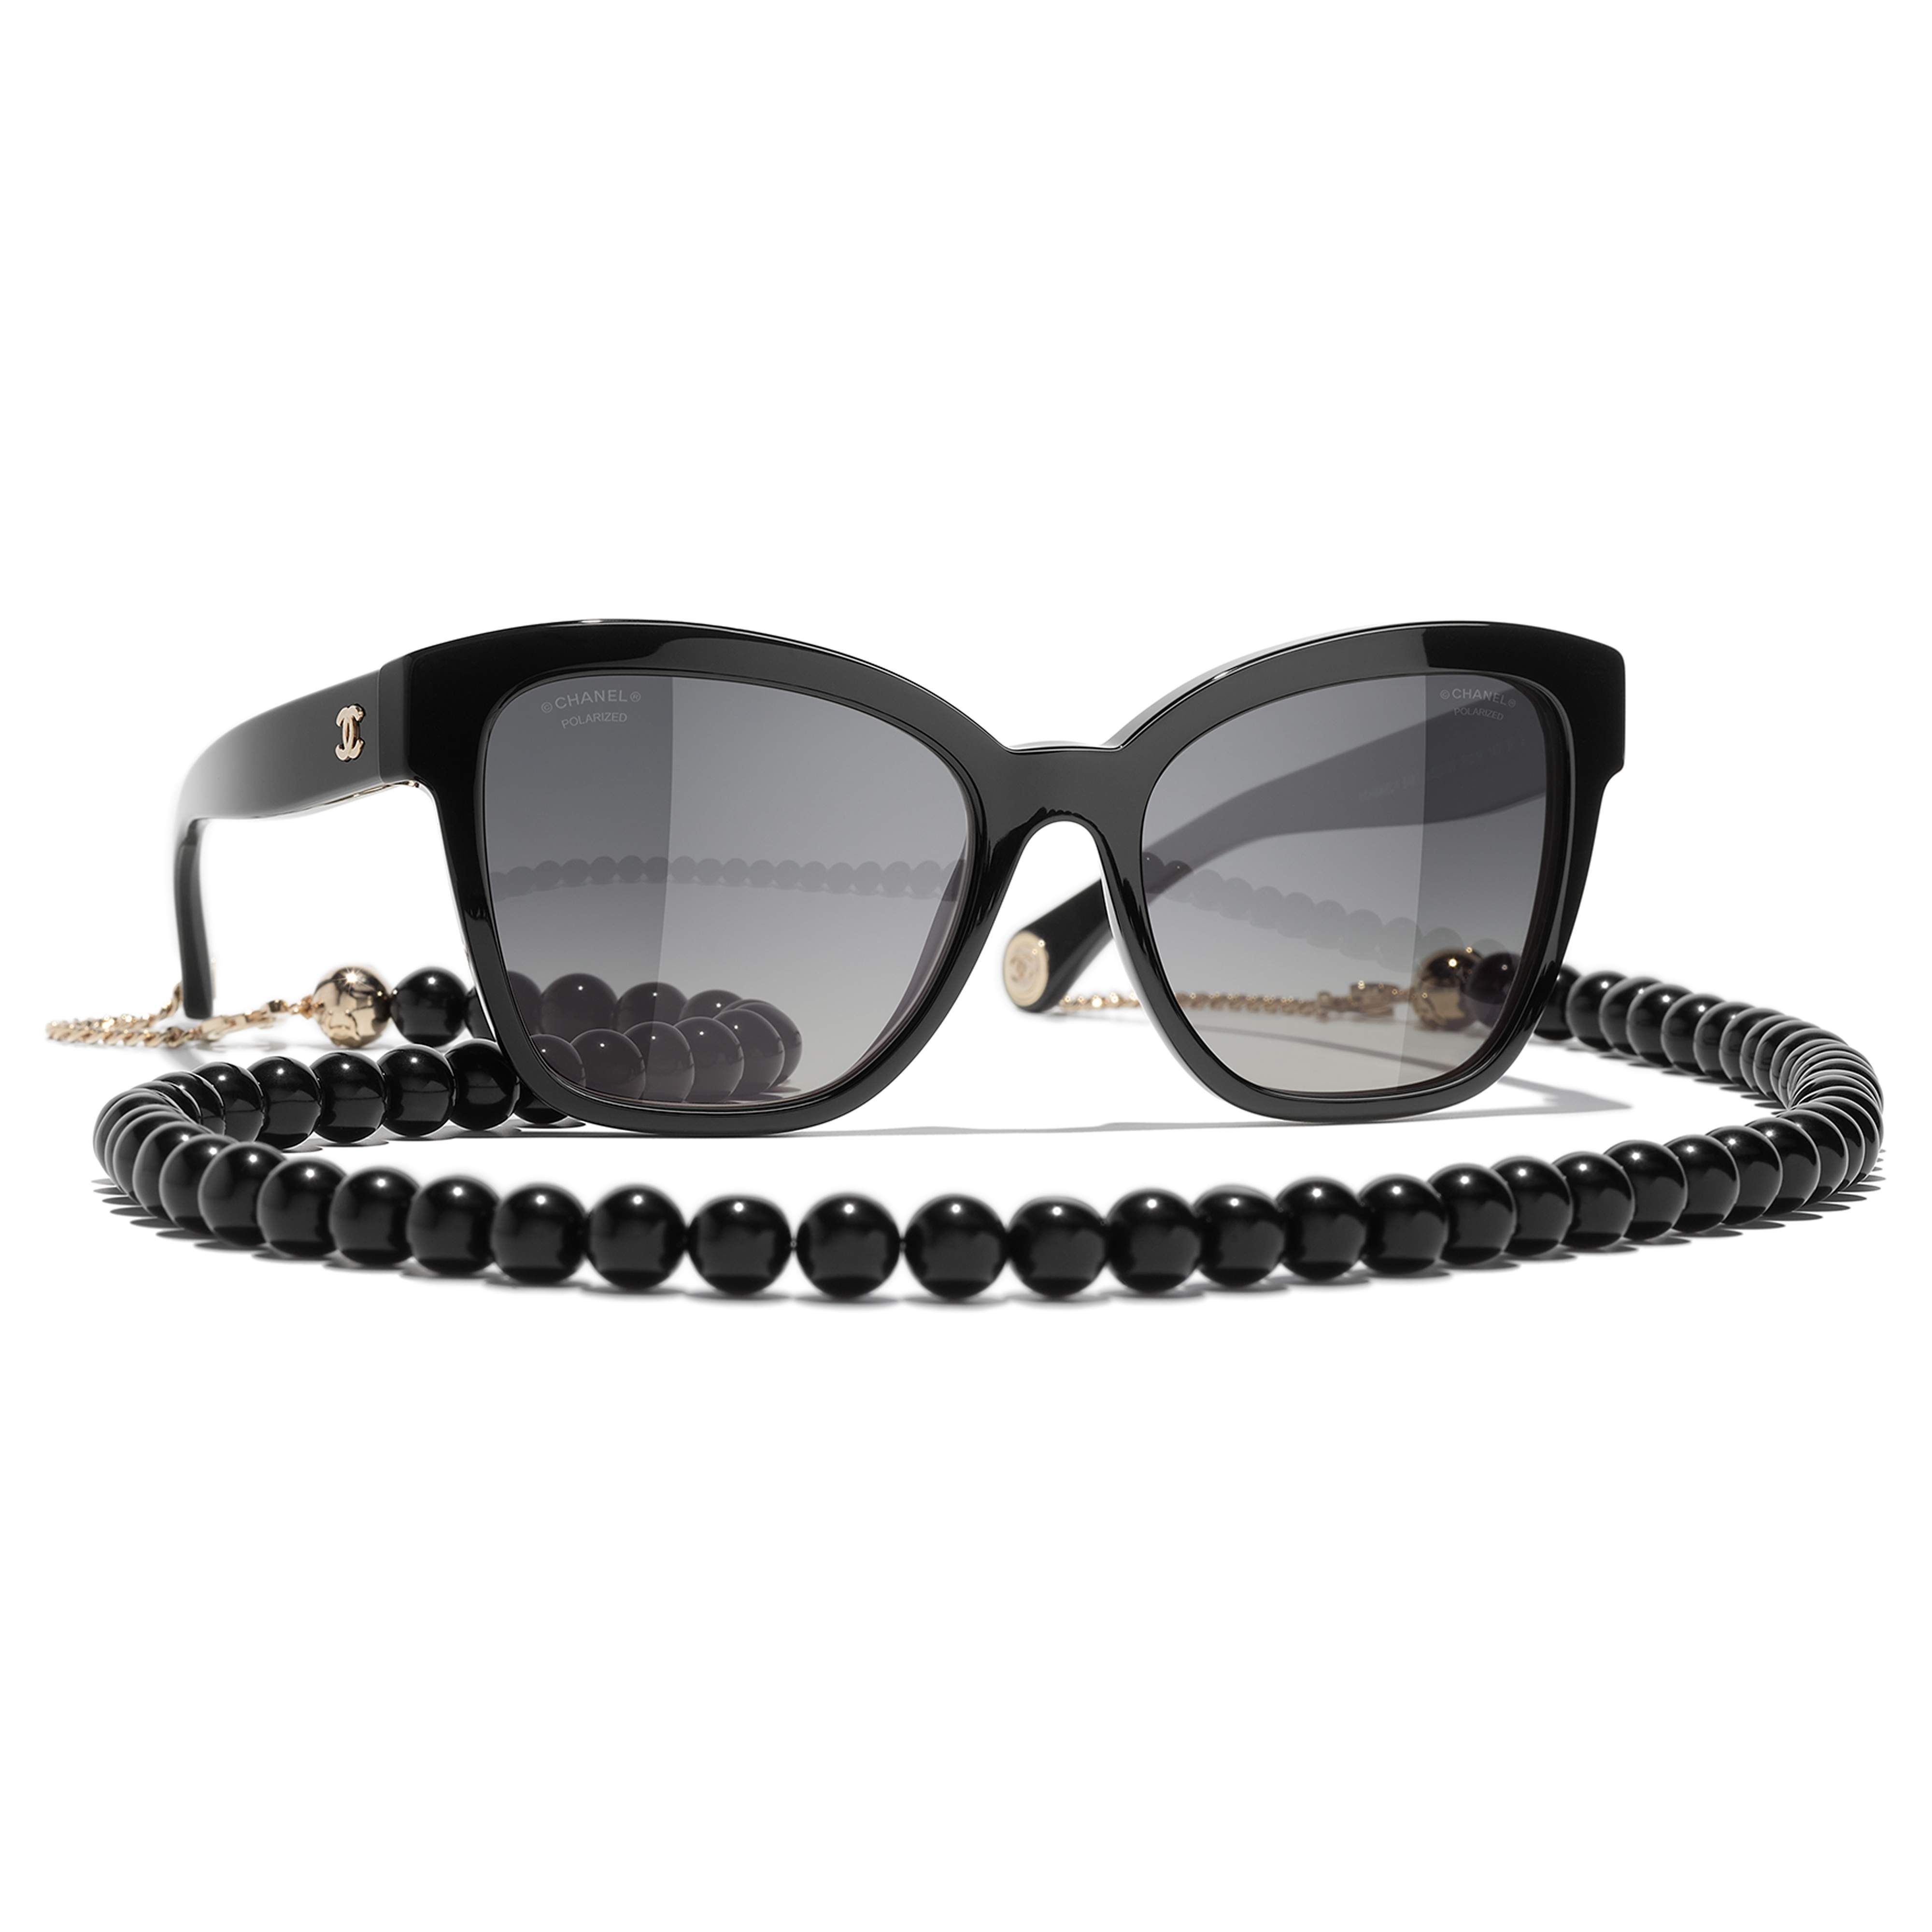 Sunglasses CHANEL Coco charms CH5479 1403/S6 56-18 Black in stock, Price  CHF 253.00